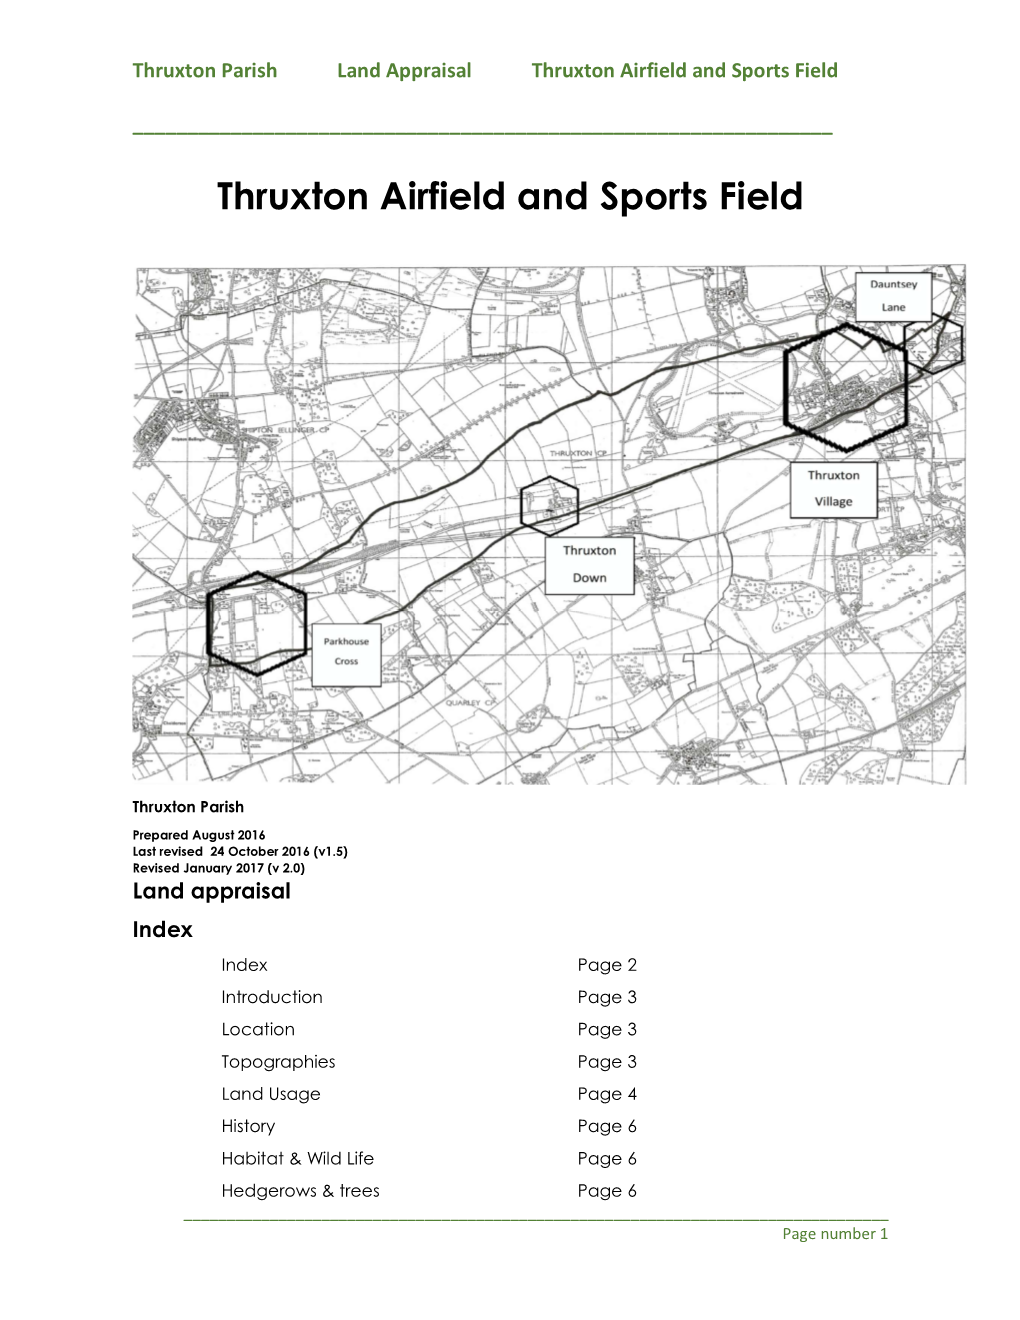 Thruxton Airfield and Sports Field